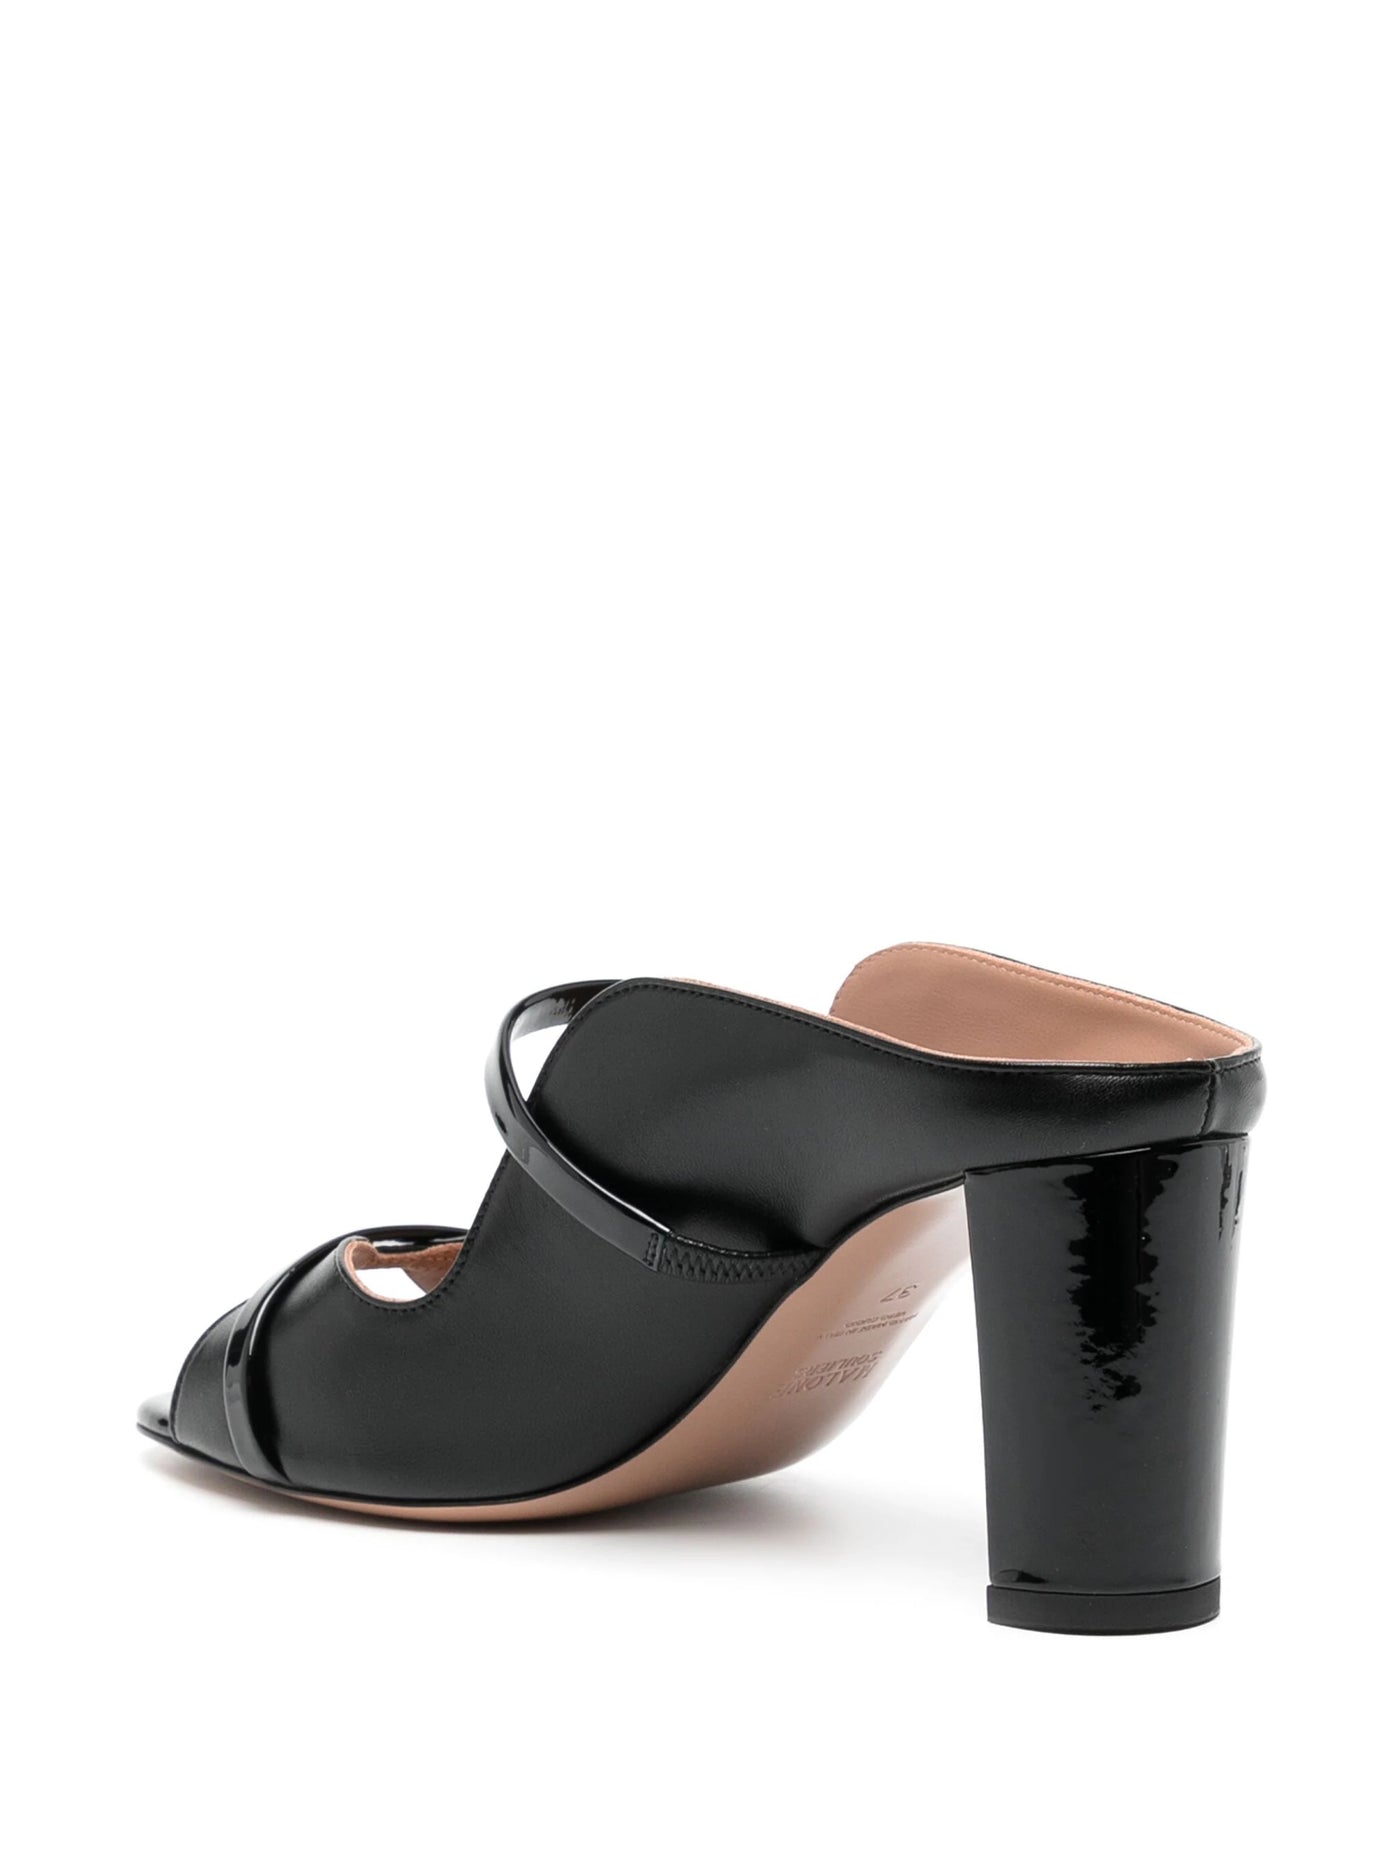 SANDAL WITH DOUBLE STRAPS ON BLOCK HEEL